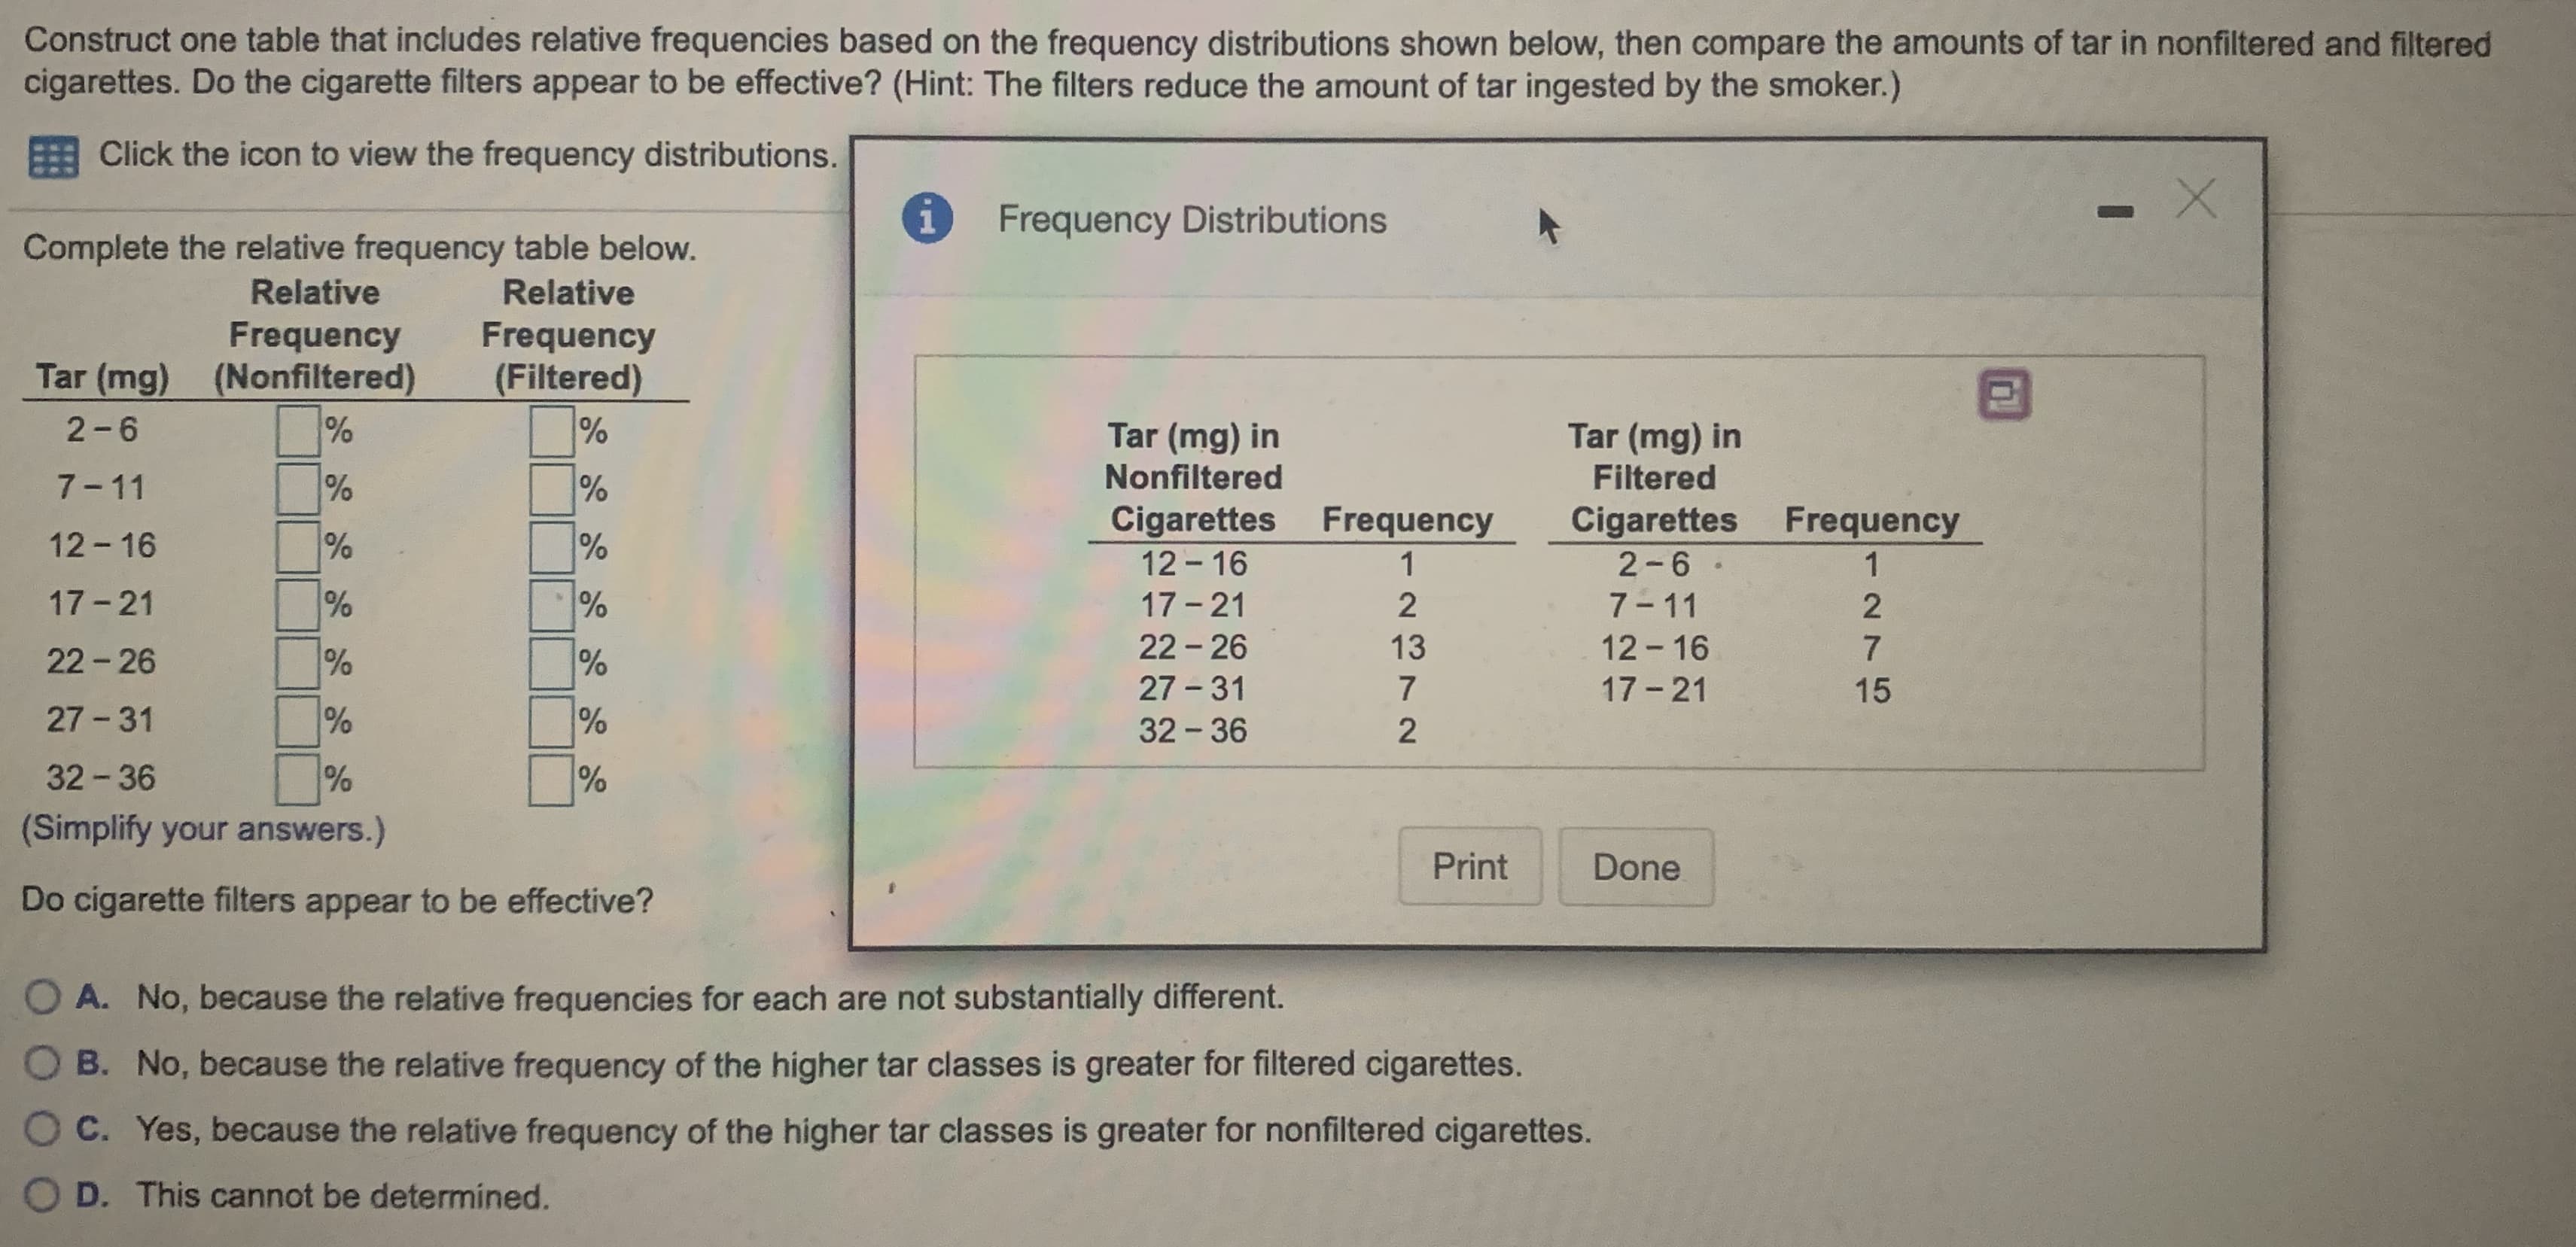 Construct one table that includes relative frequencies based on the frequency distributions shown below, then compare the amounts of tar in nonfiltered and filtered
cigarettes. Do the cigarette filters appear to be effective? (Hint: The filters reduce the amount of tar ingested by the smoker.)
